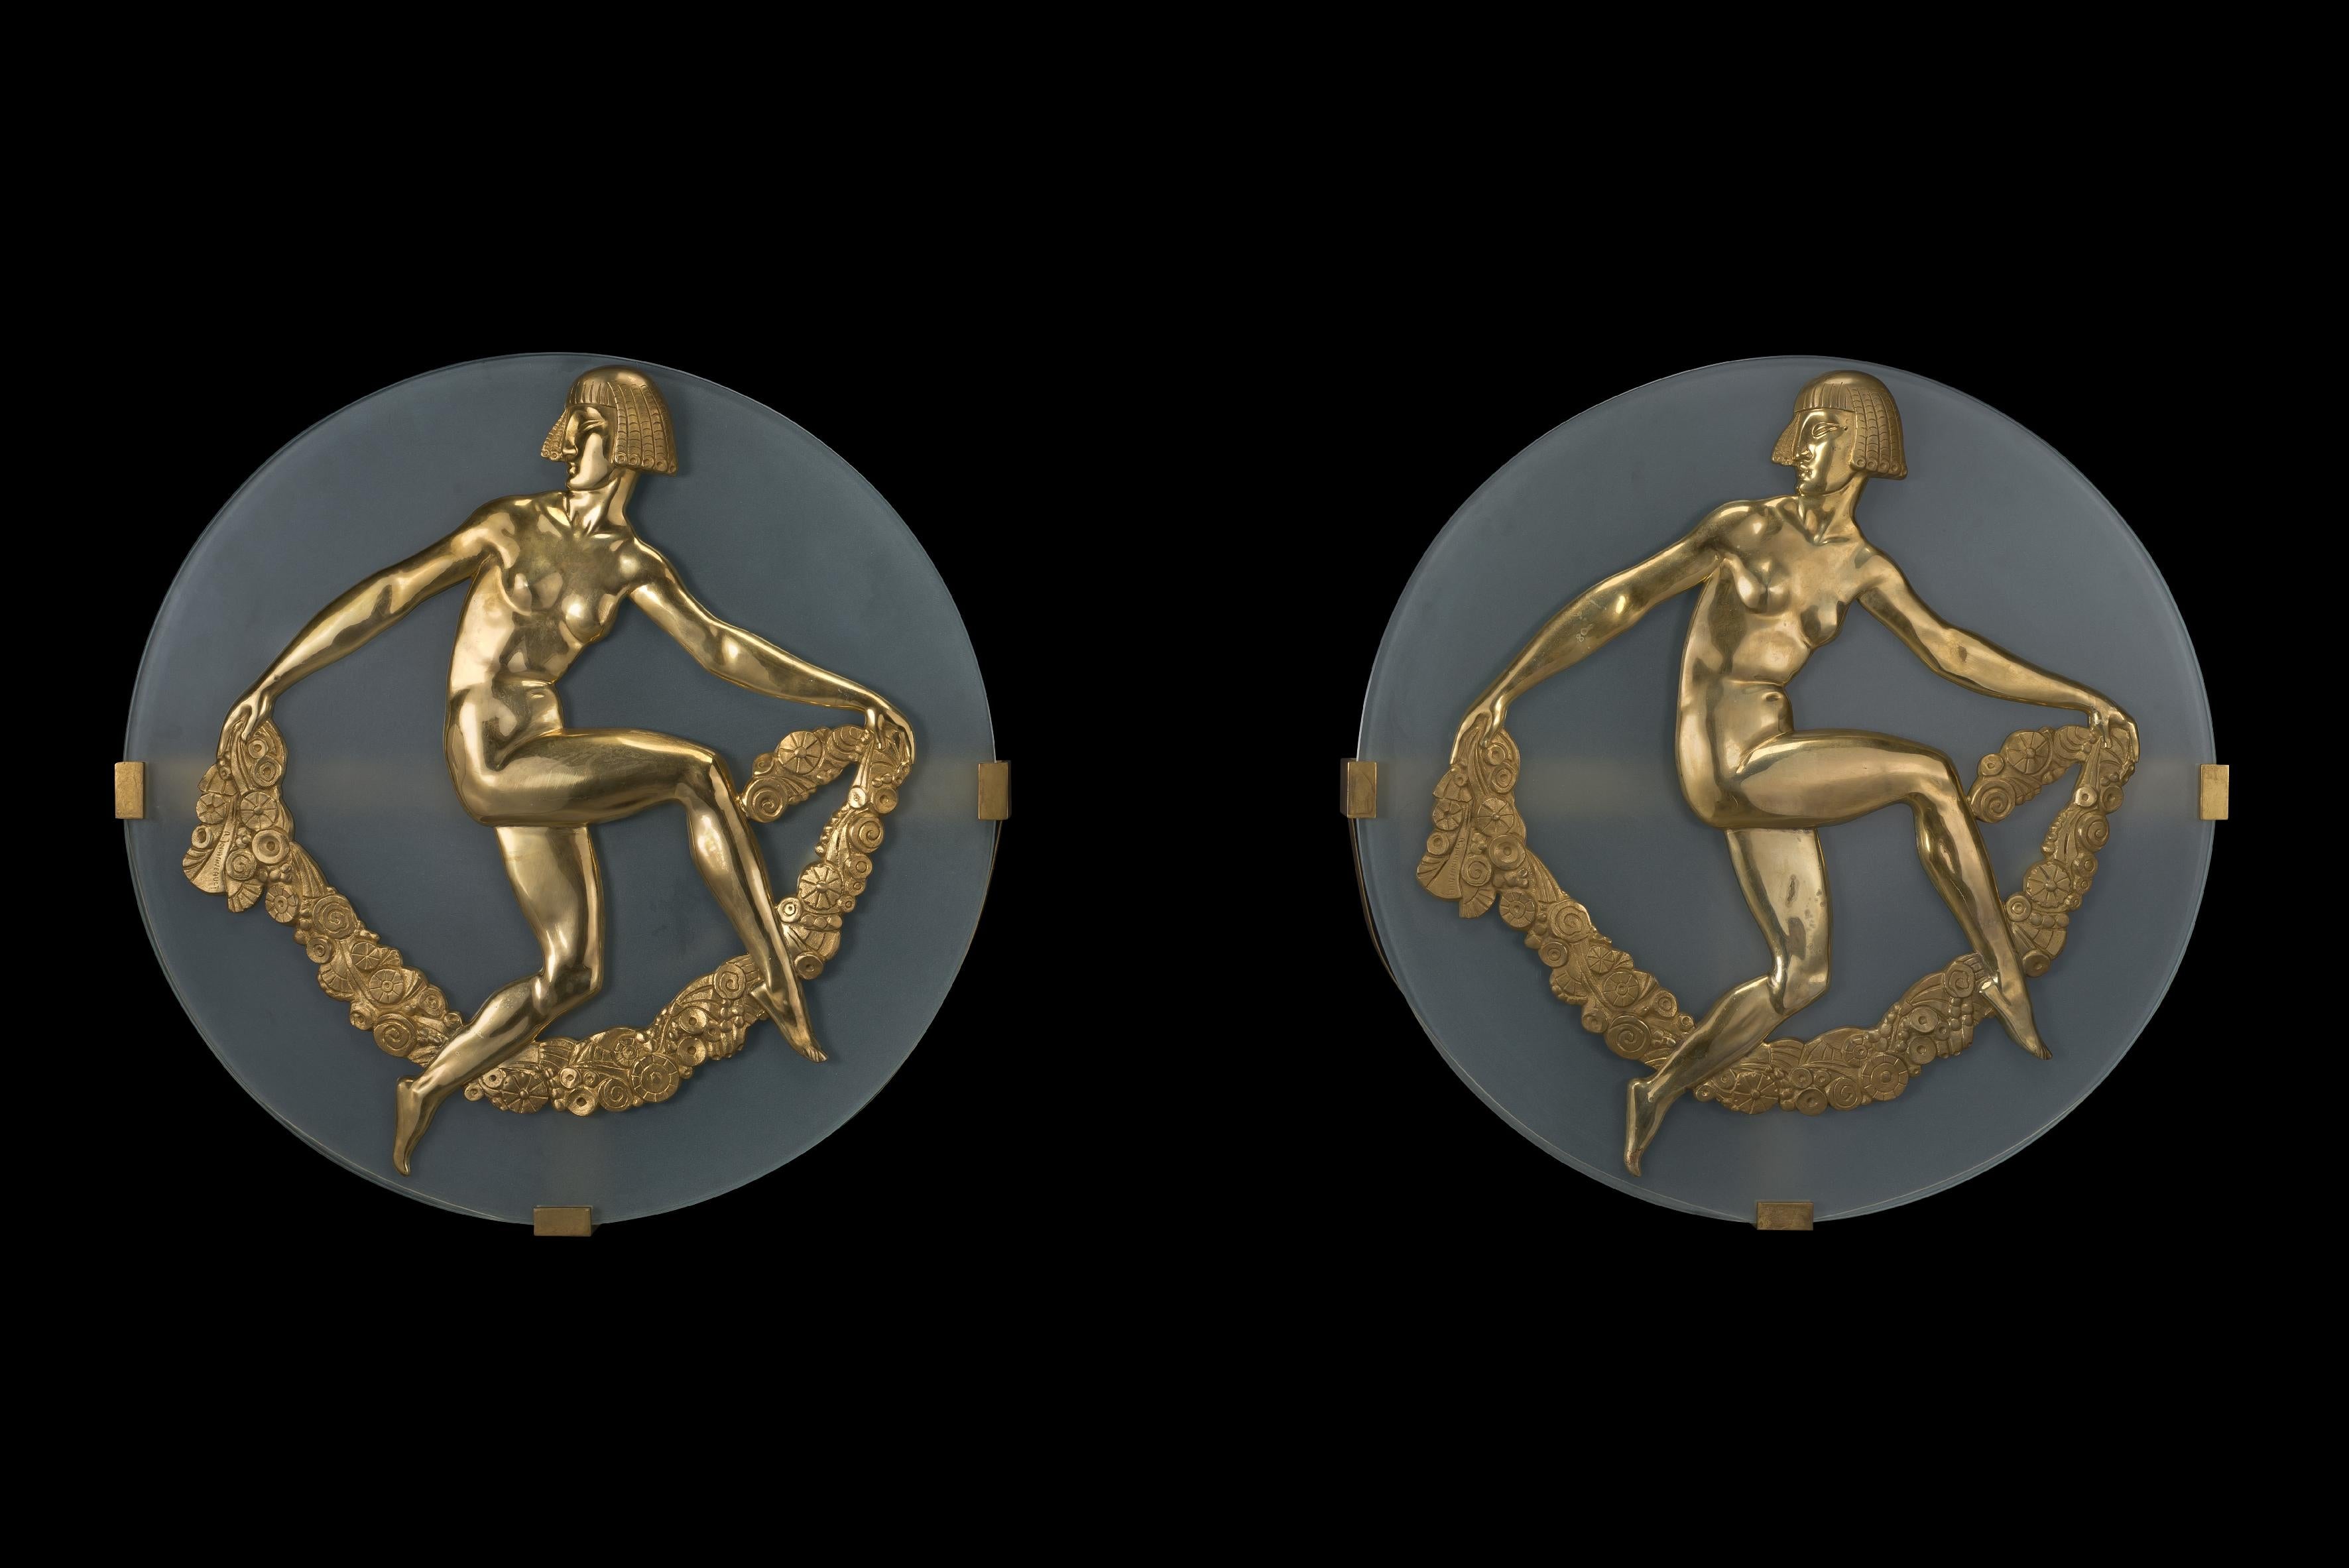 A fine pair Of Art Deco wall appliques by Albert Constant Jouanneault.

French, circa 1930.

Signed in the cast 'A. Jouanneault'.

Each circular frosted glass applique is mounted with a fine gilt bronze figure of a naked leaping dancer holding